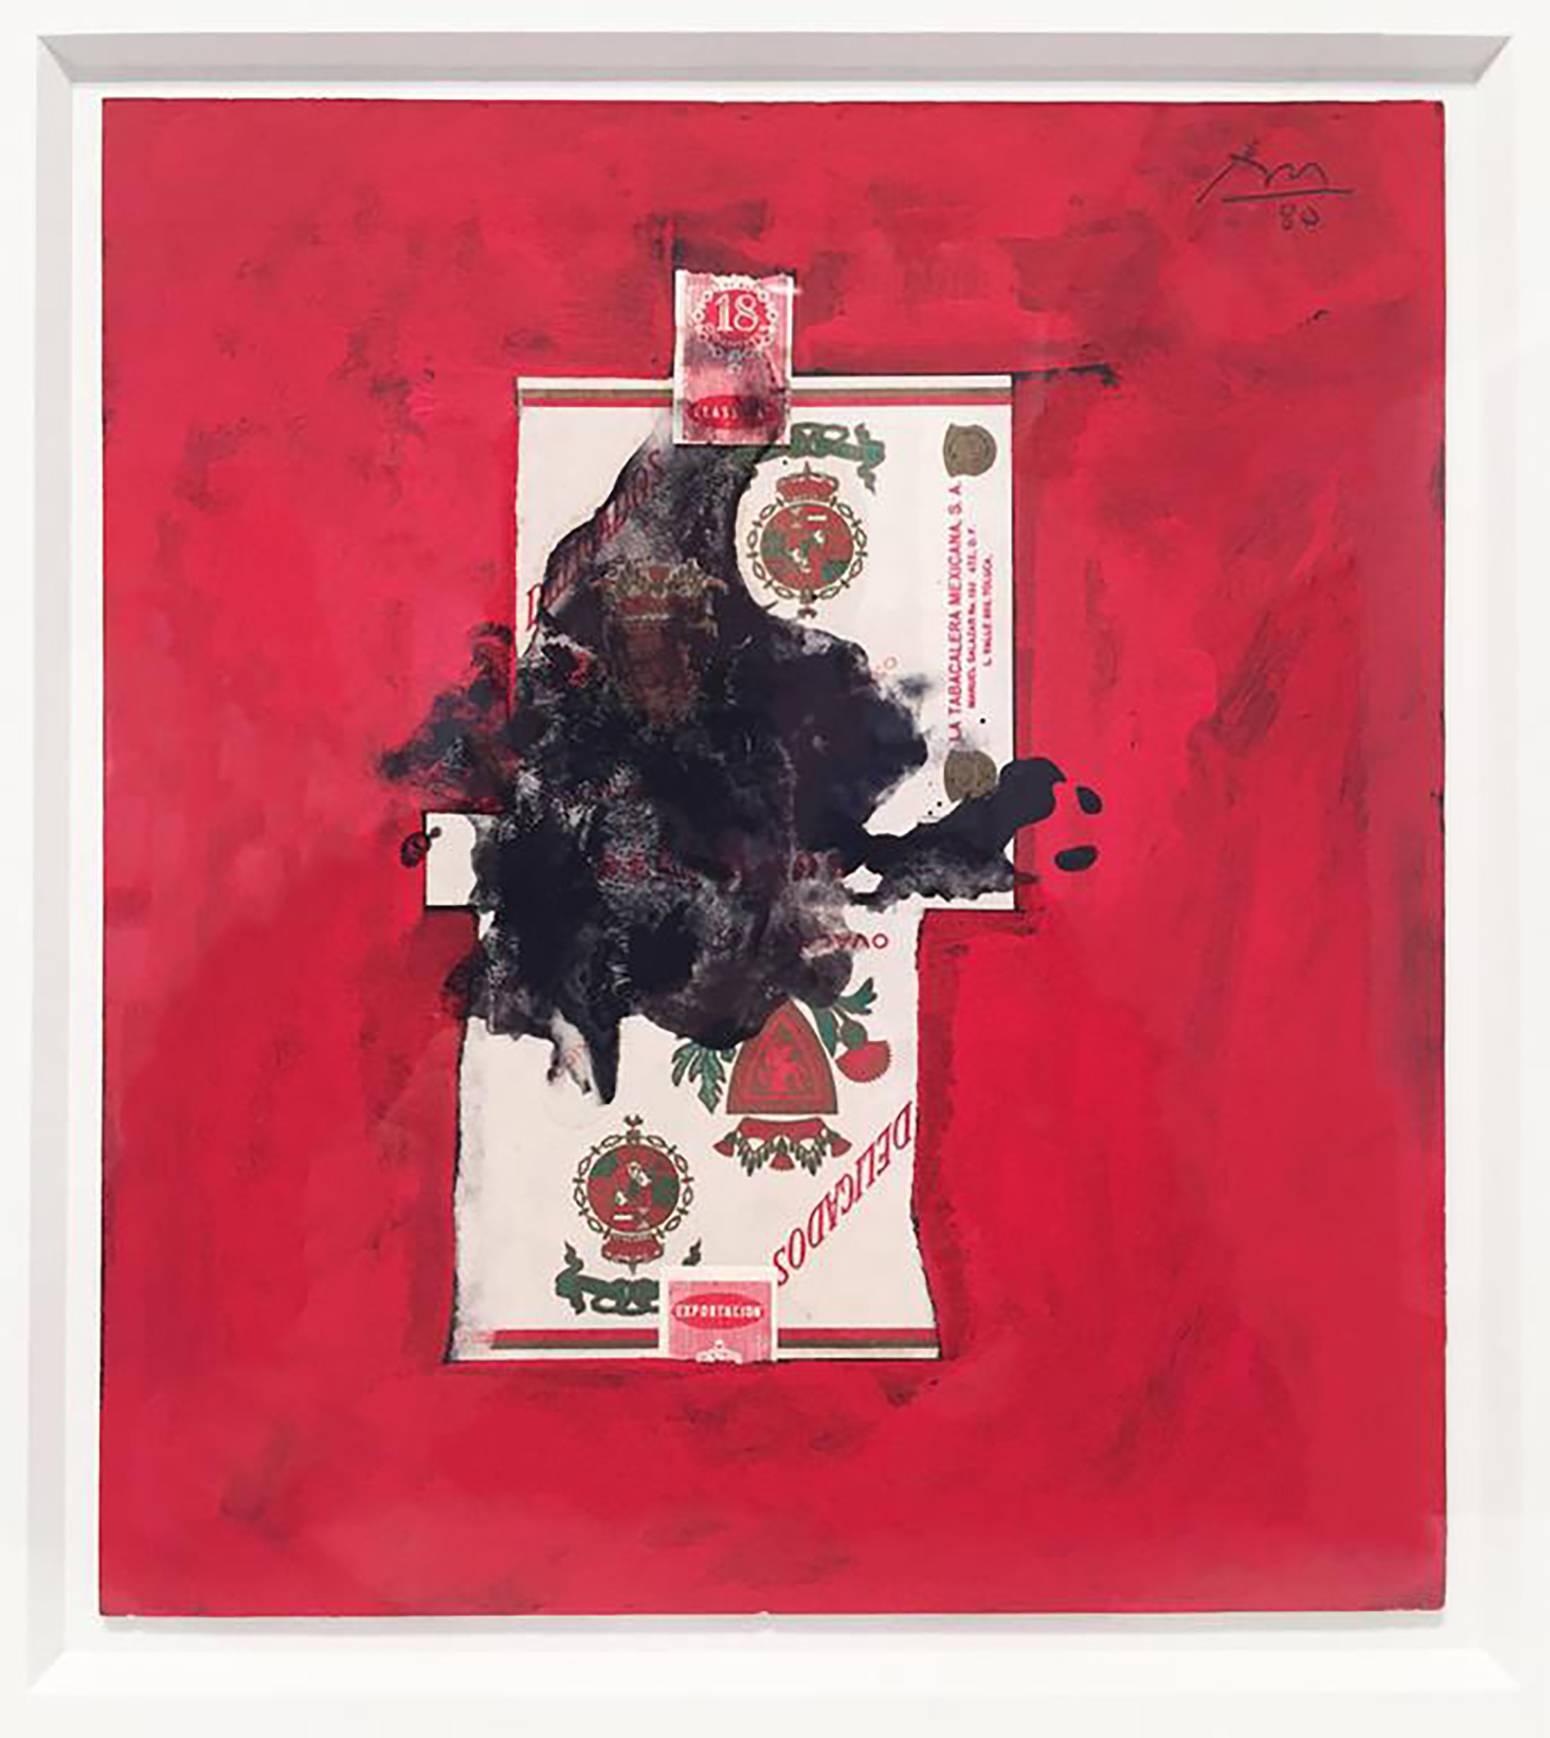 Delicados - Mixed Media Art by Robert Motherwell